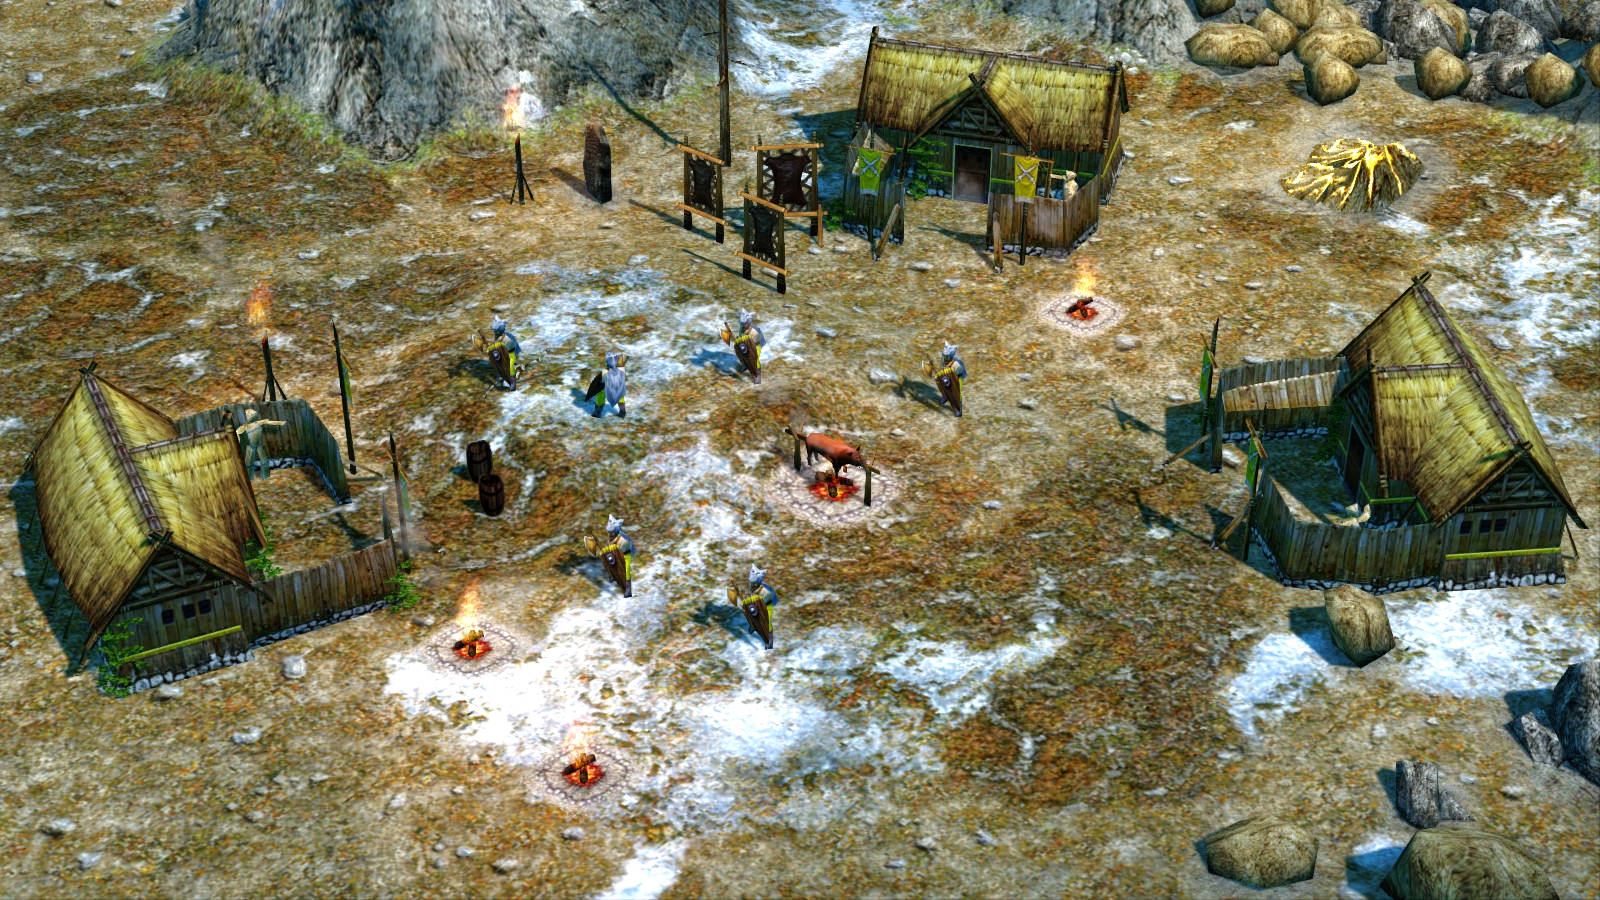 Rise of Nations Extended Edition (in 2023) Review - Age of Empires